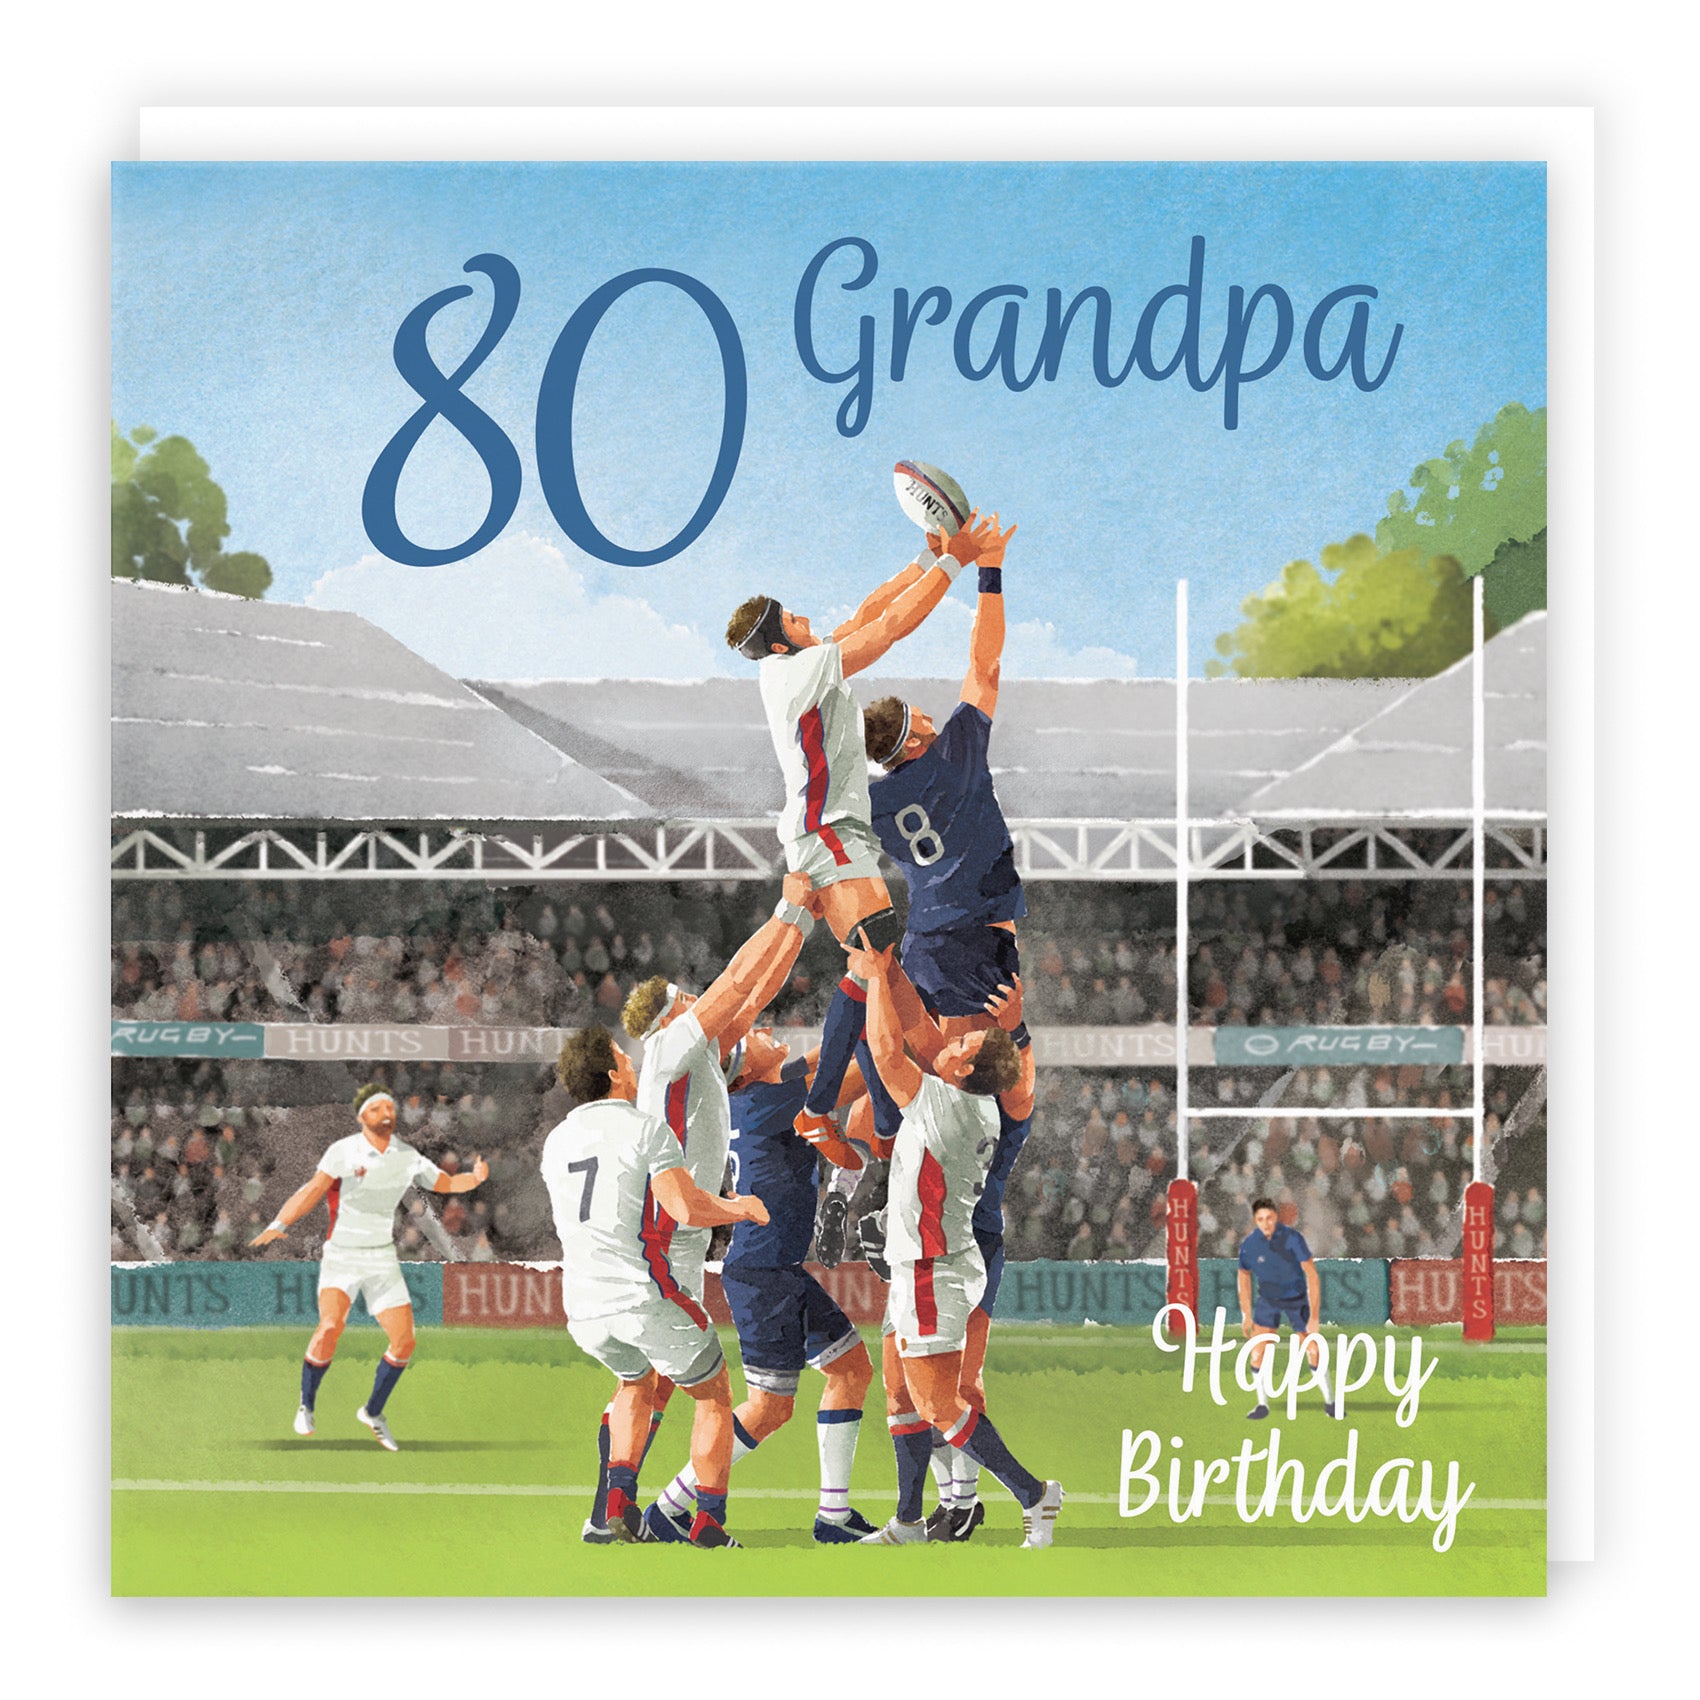 80th Grandpa Rugby Birthday Card Milo's Gallery - Default Title (B0CPQYV8TW)